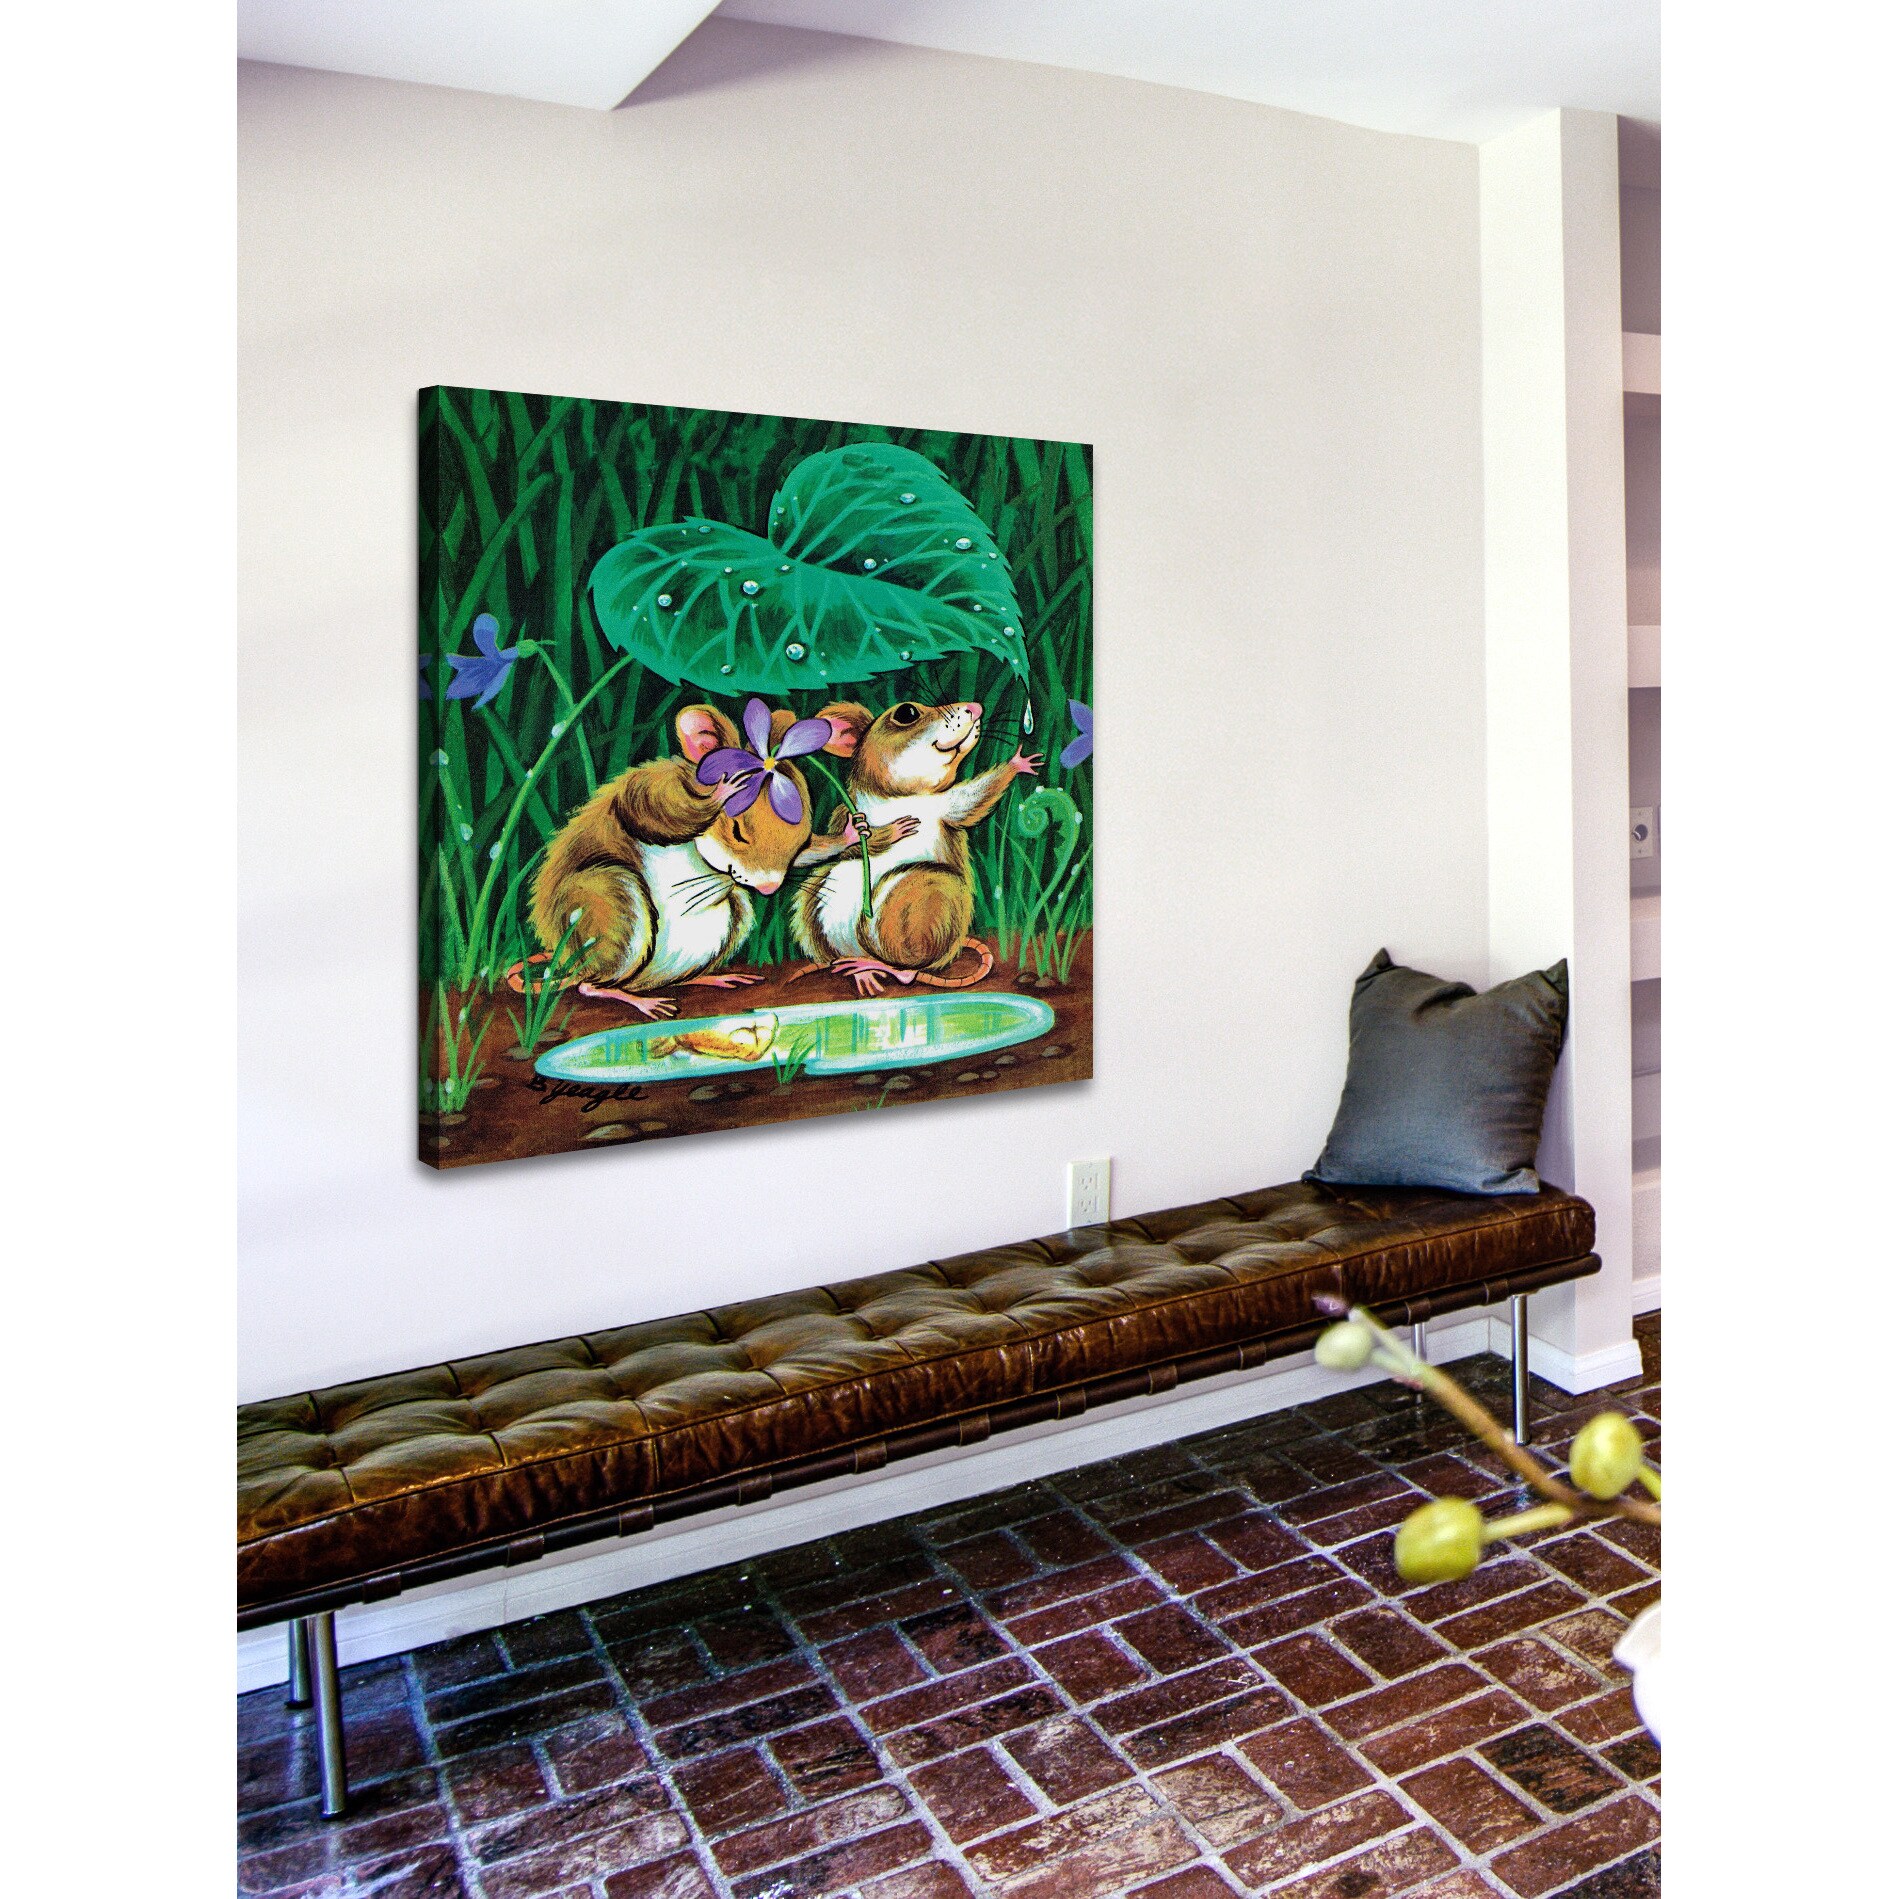 https://ak1.ostkcdn.com/images/products/11702393/Marmont-Hill-Sweet-Mouses-by-Curtis-Painting-Print-on-Canvas-9932fb65-d131-46b5-8cc8-2fd25d5933d7.jpg